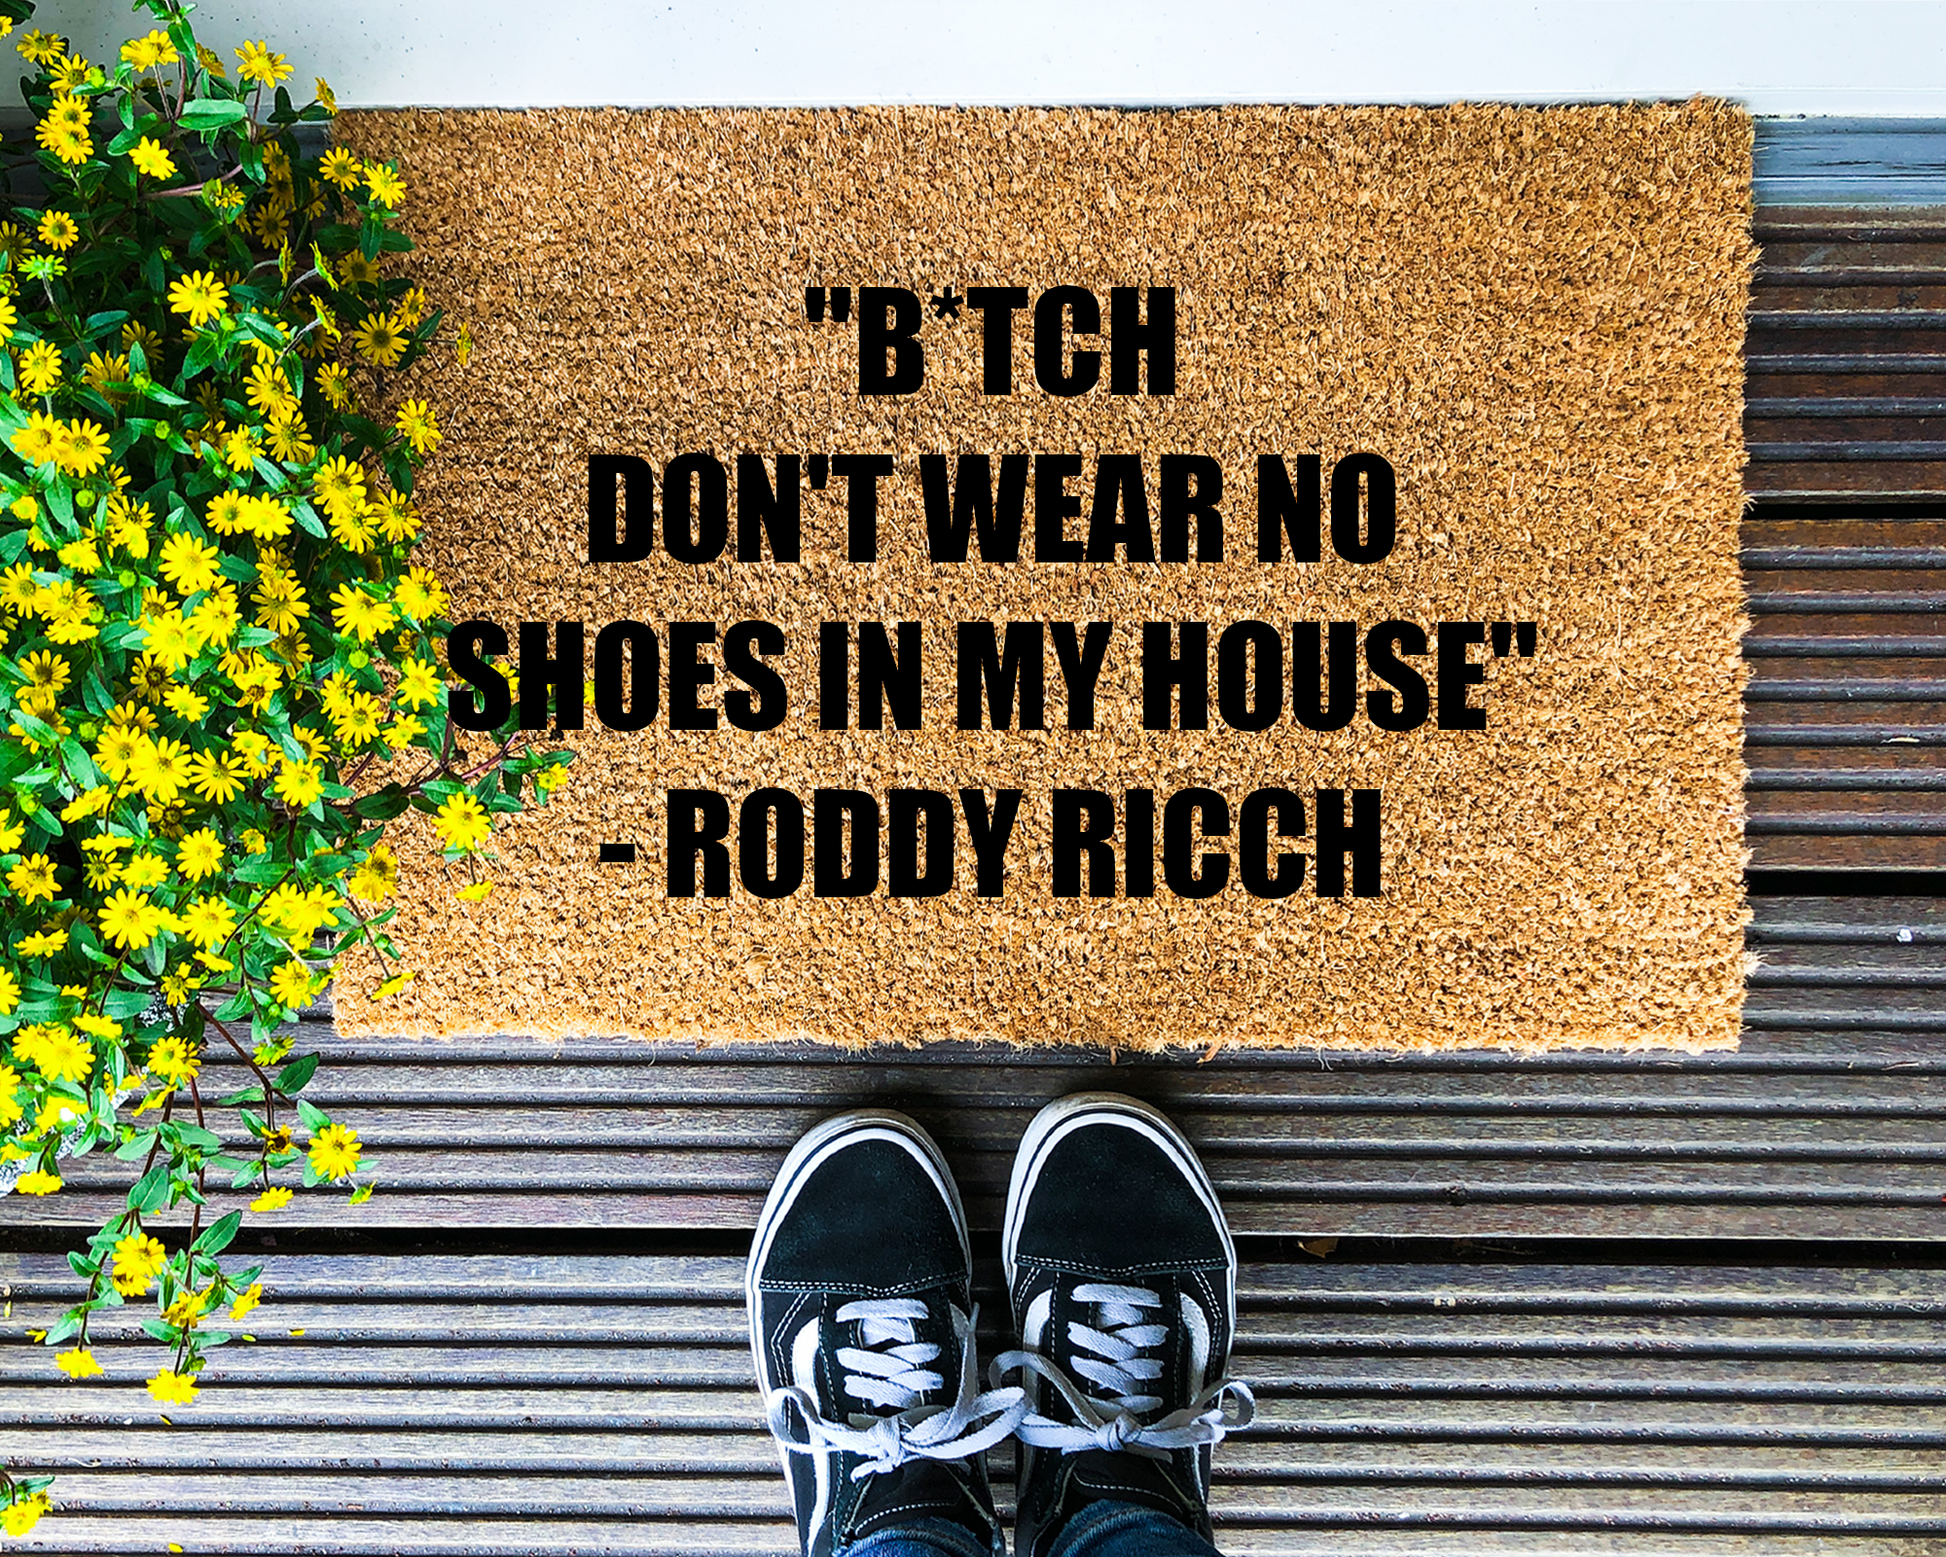 B*tch don't wear no shoes in my house - Roddy Ricch - Coir Doormat - DAPAH Gifts